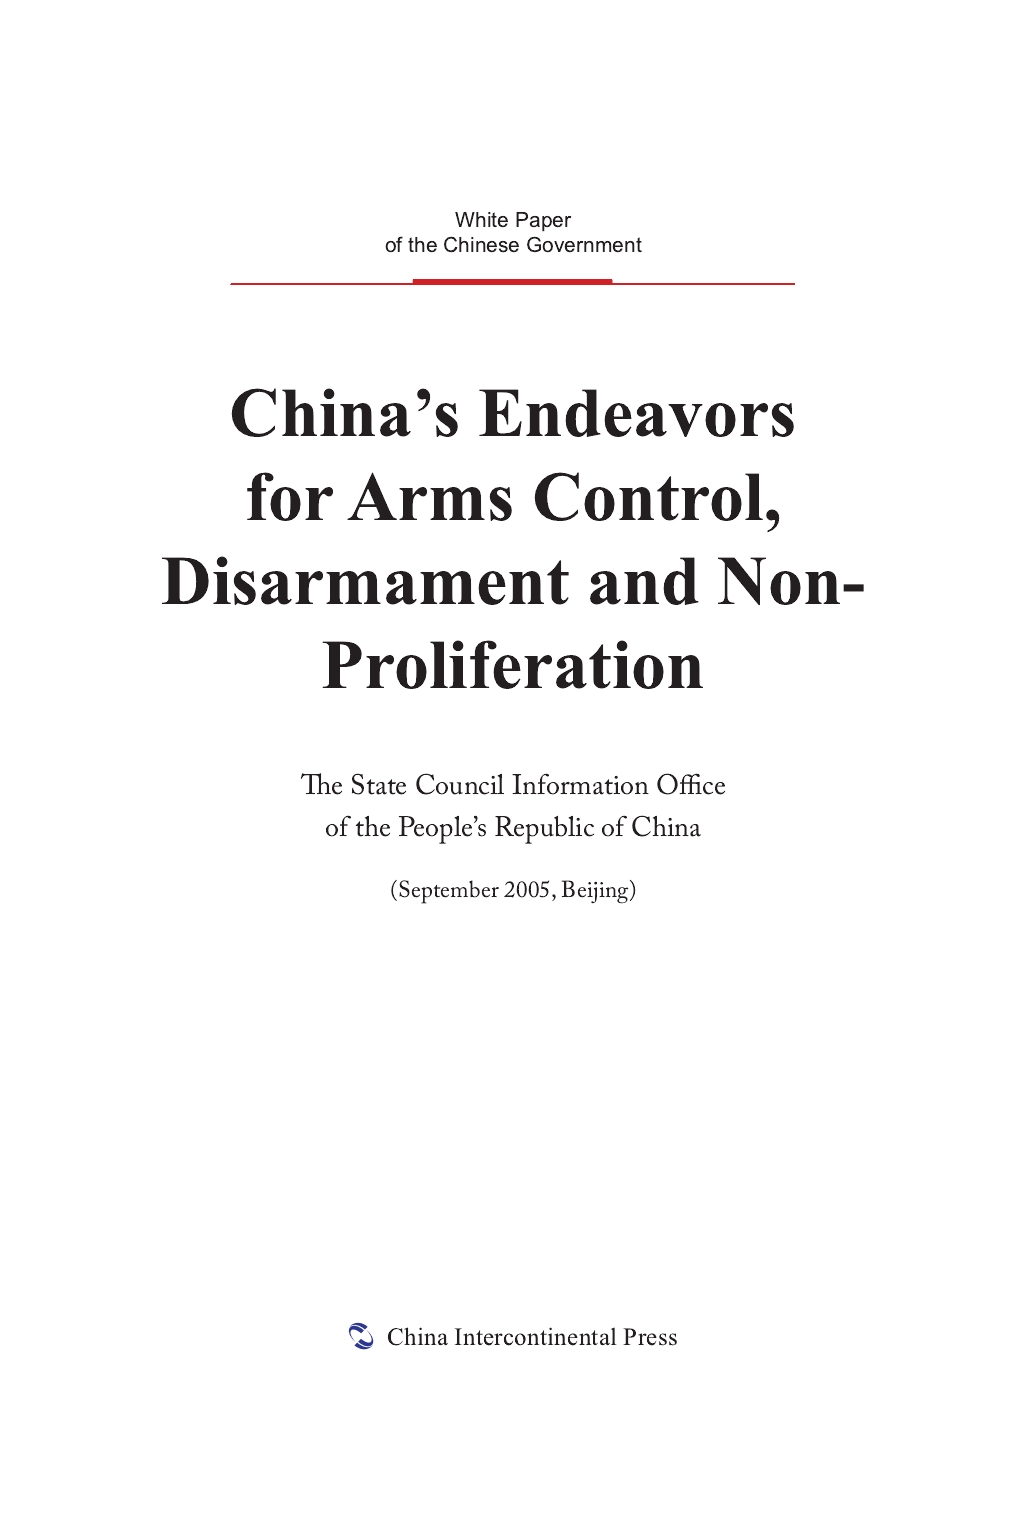 China's Endeavors for Arms Control，Disarmament and Non-Proliferation